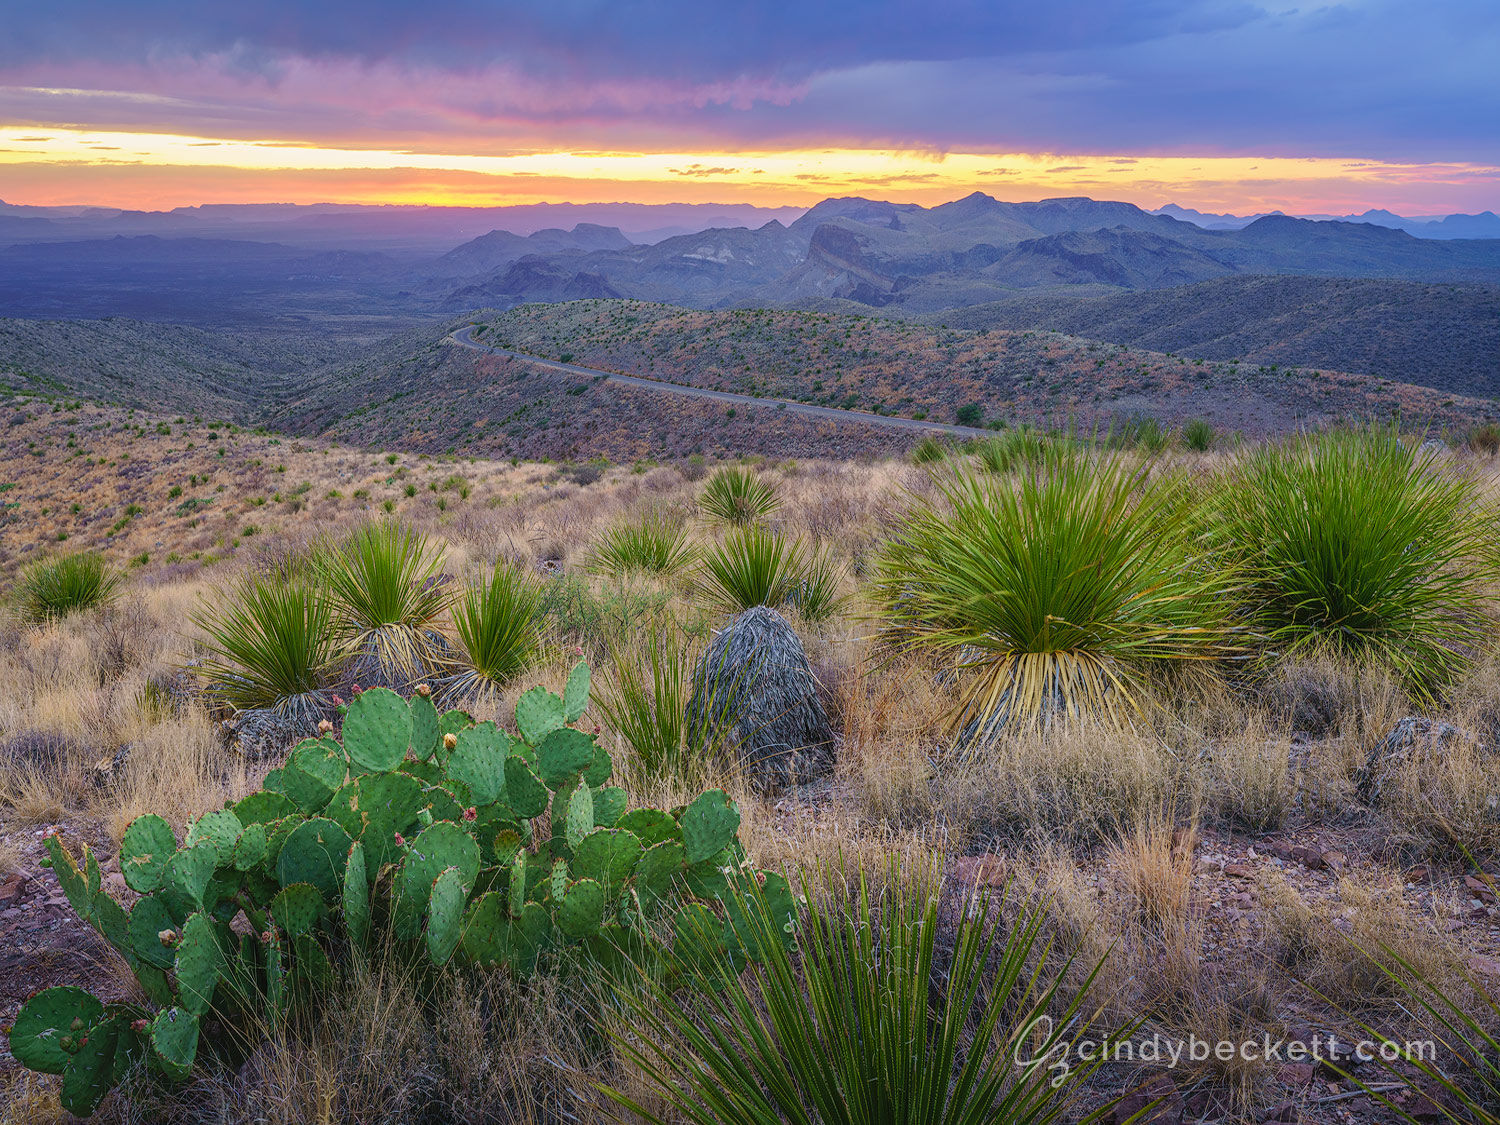 Cactus and yucca sit on the hilltop at Soltol Vista with Ross Maxwell Scenic drive leading across the mesa. A colorful sunset lights clearing storm clouds.